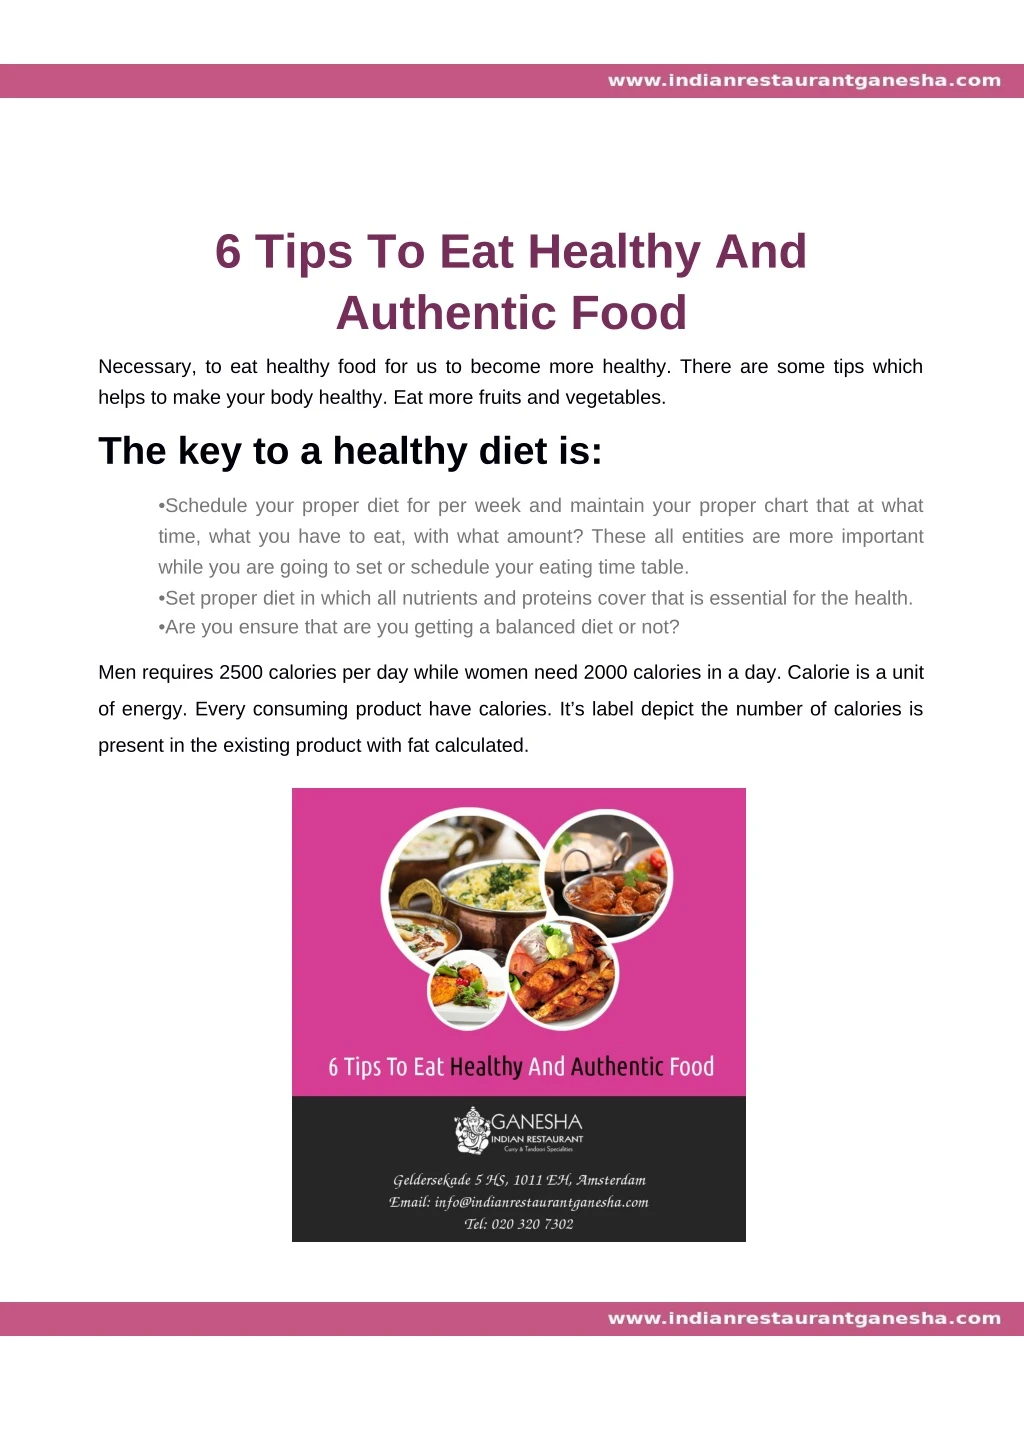 6 tips to eat healthy and authentic food